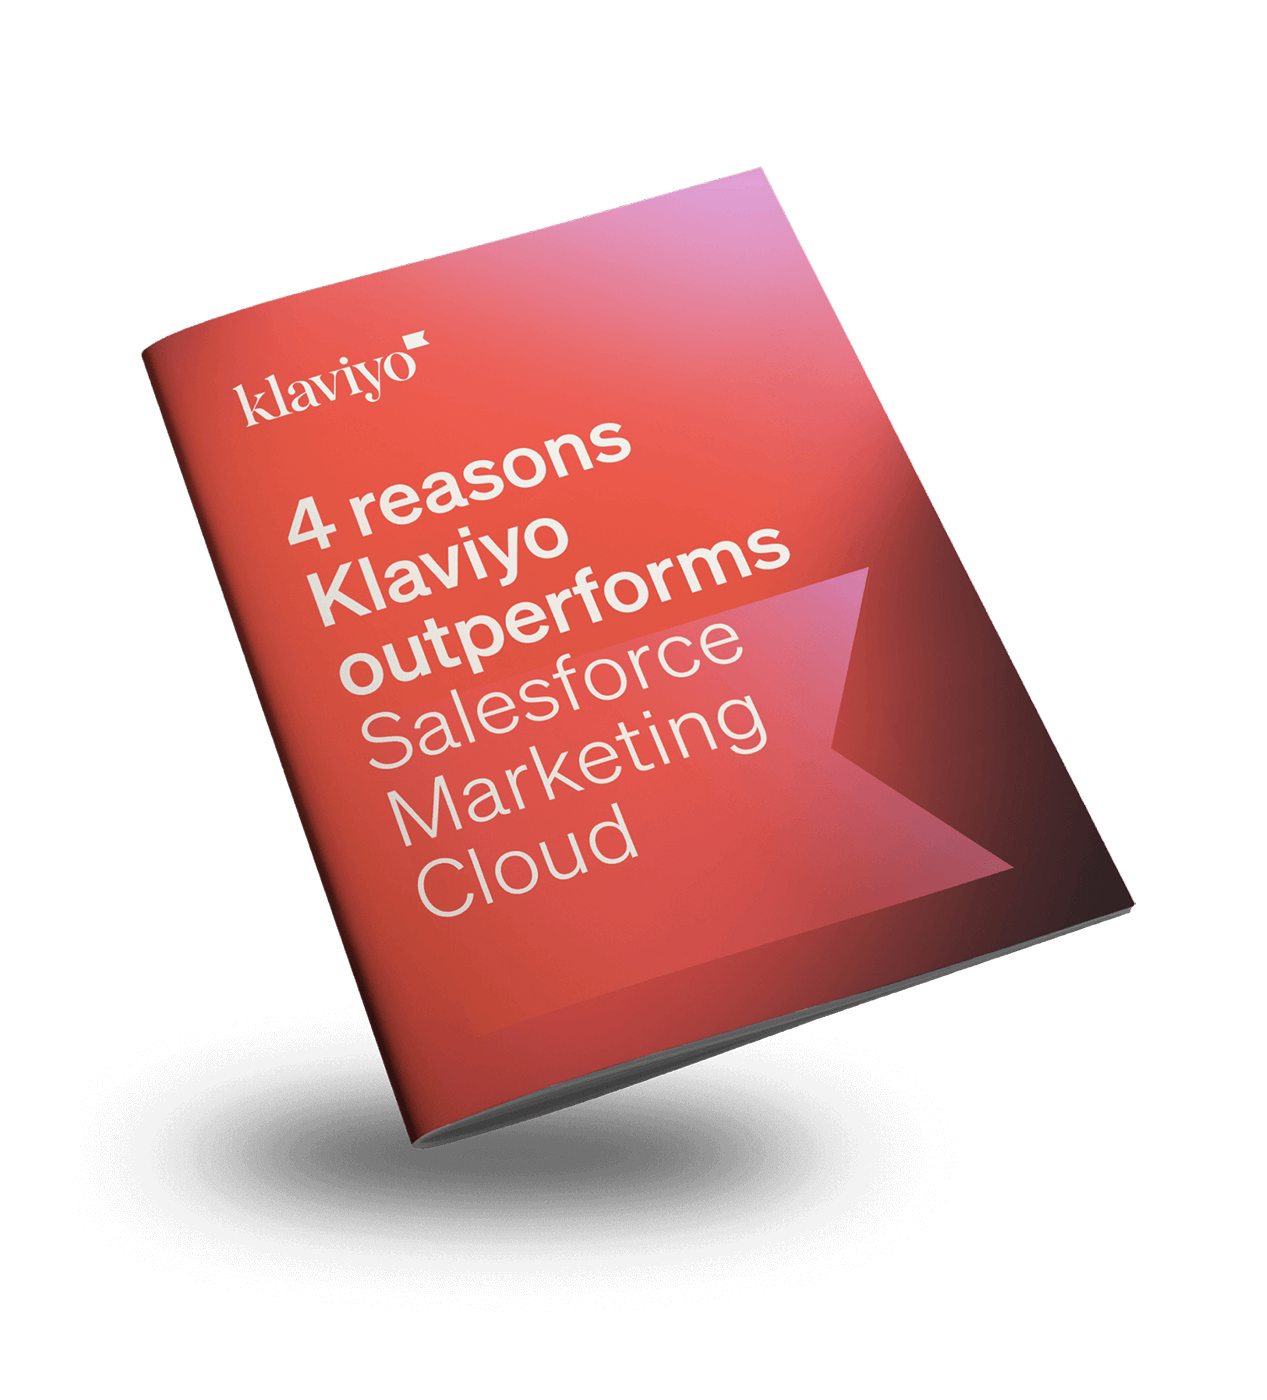 poppy-colored cover of guide with the Klaviyo logo in the top left corner and the title "4 reasons Klaviyo outperforms Salesforce Marketing Cloud"